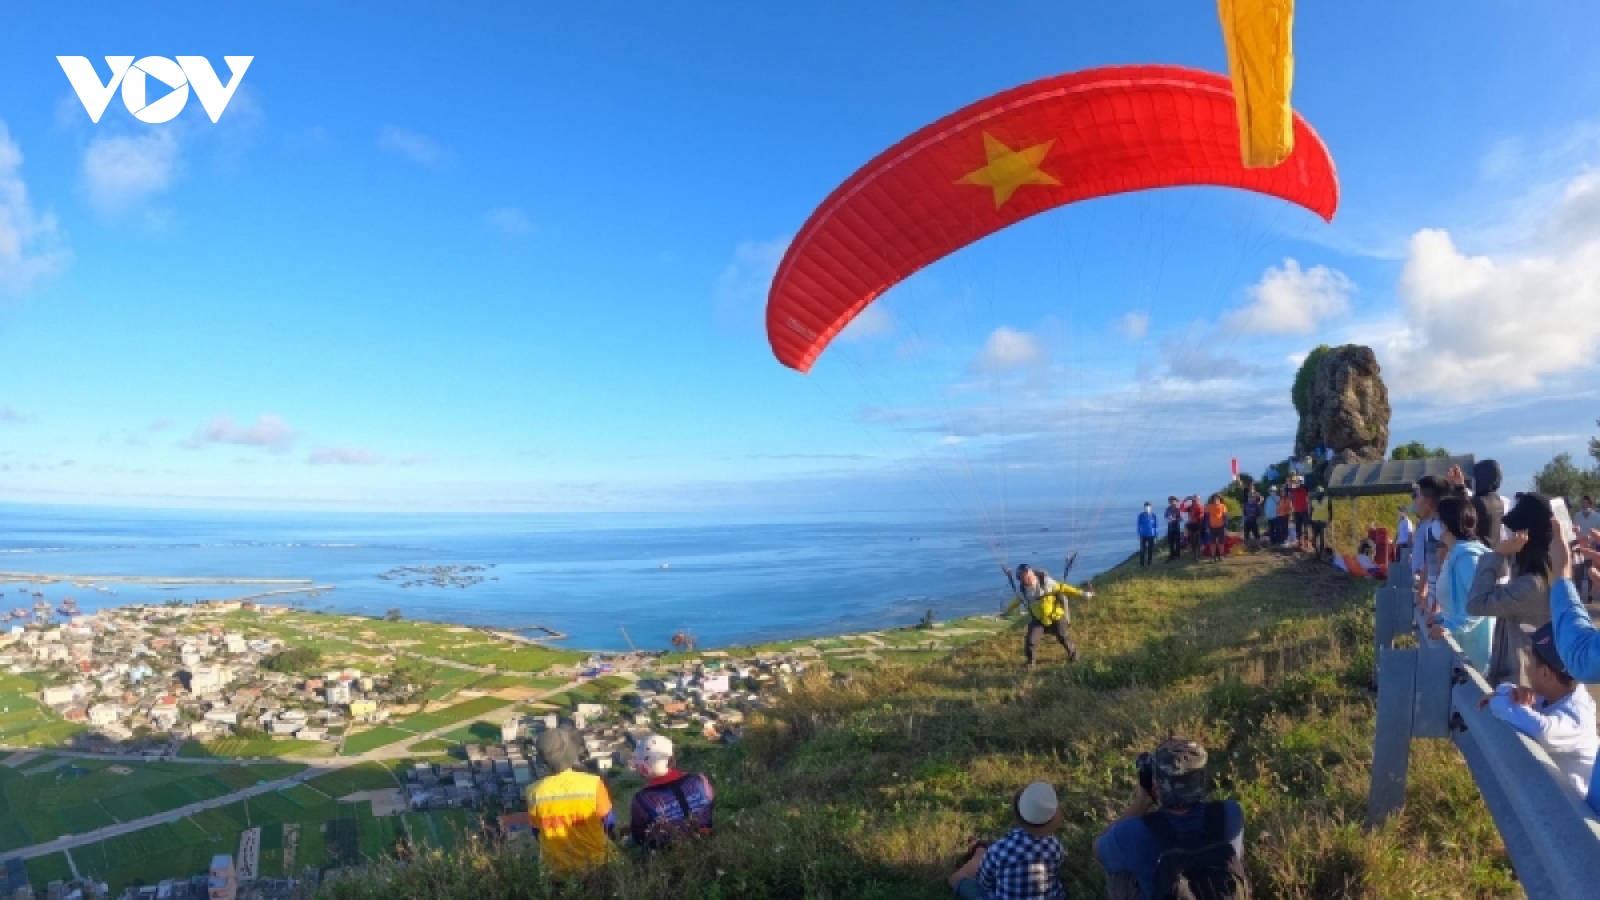 Paragliders fly over Ly Son island